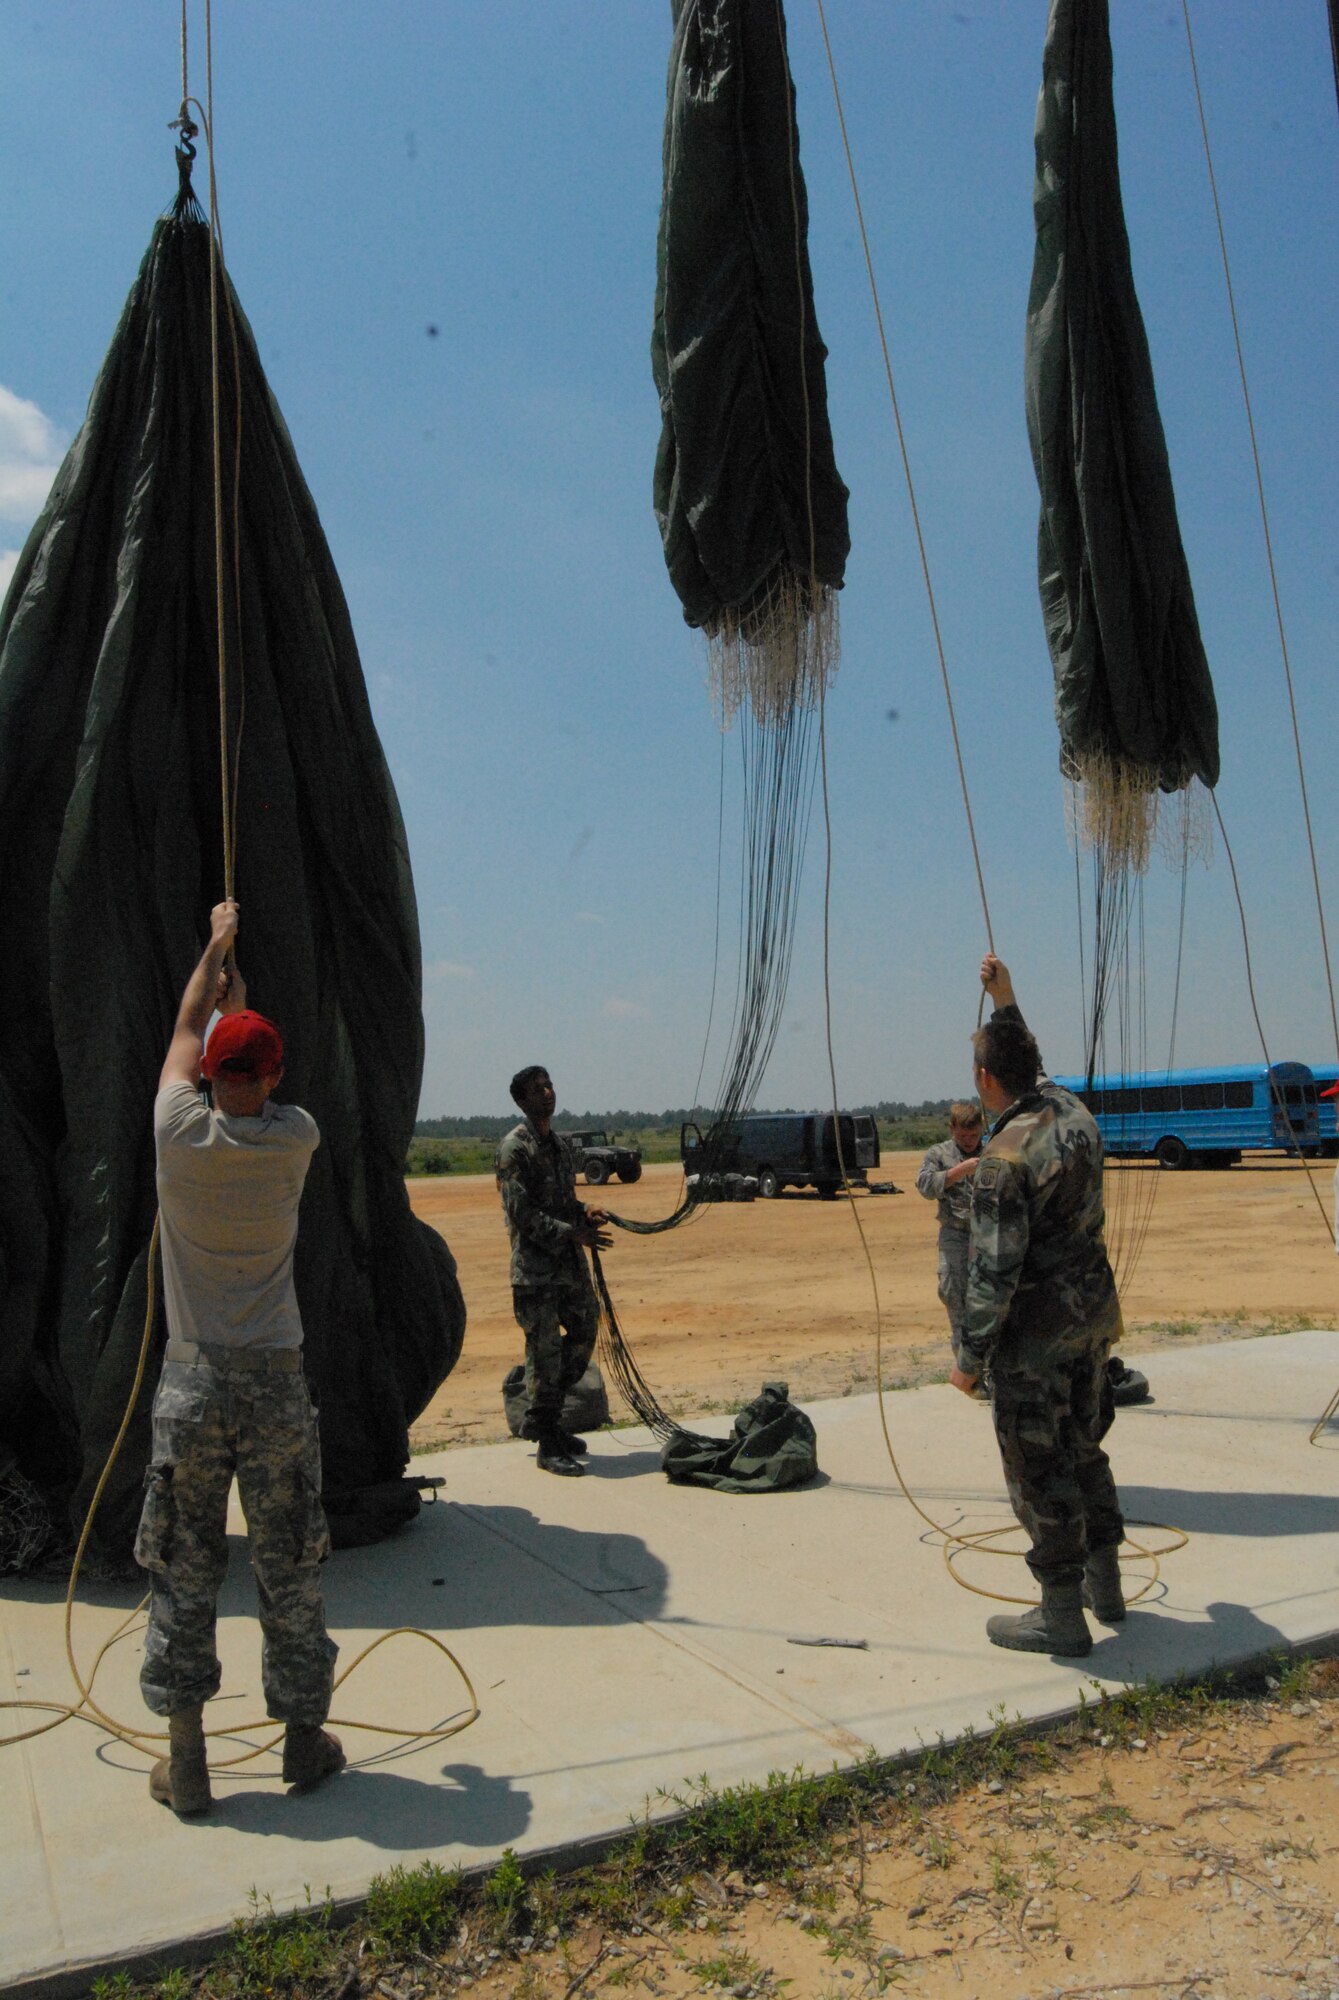 Airmen from the 93rd Air Ground Operations Wing and parachute riggers from Fort Bragg do a “chute shake out” after one of the static line jumps at Luzon Drop Zone July 16. The shake out makes sure that all debris that may have ended up in the parachute during the jump is out before the riggers re-pack it for the next jump. (U.S. Air Force Photo by 2nd Lt. Chris Hoyler)